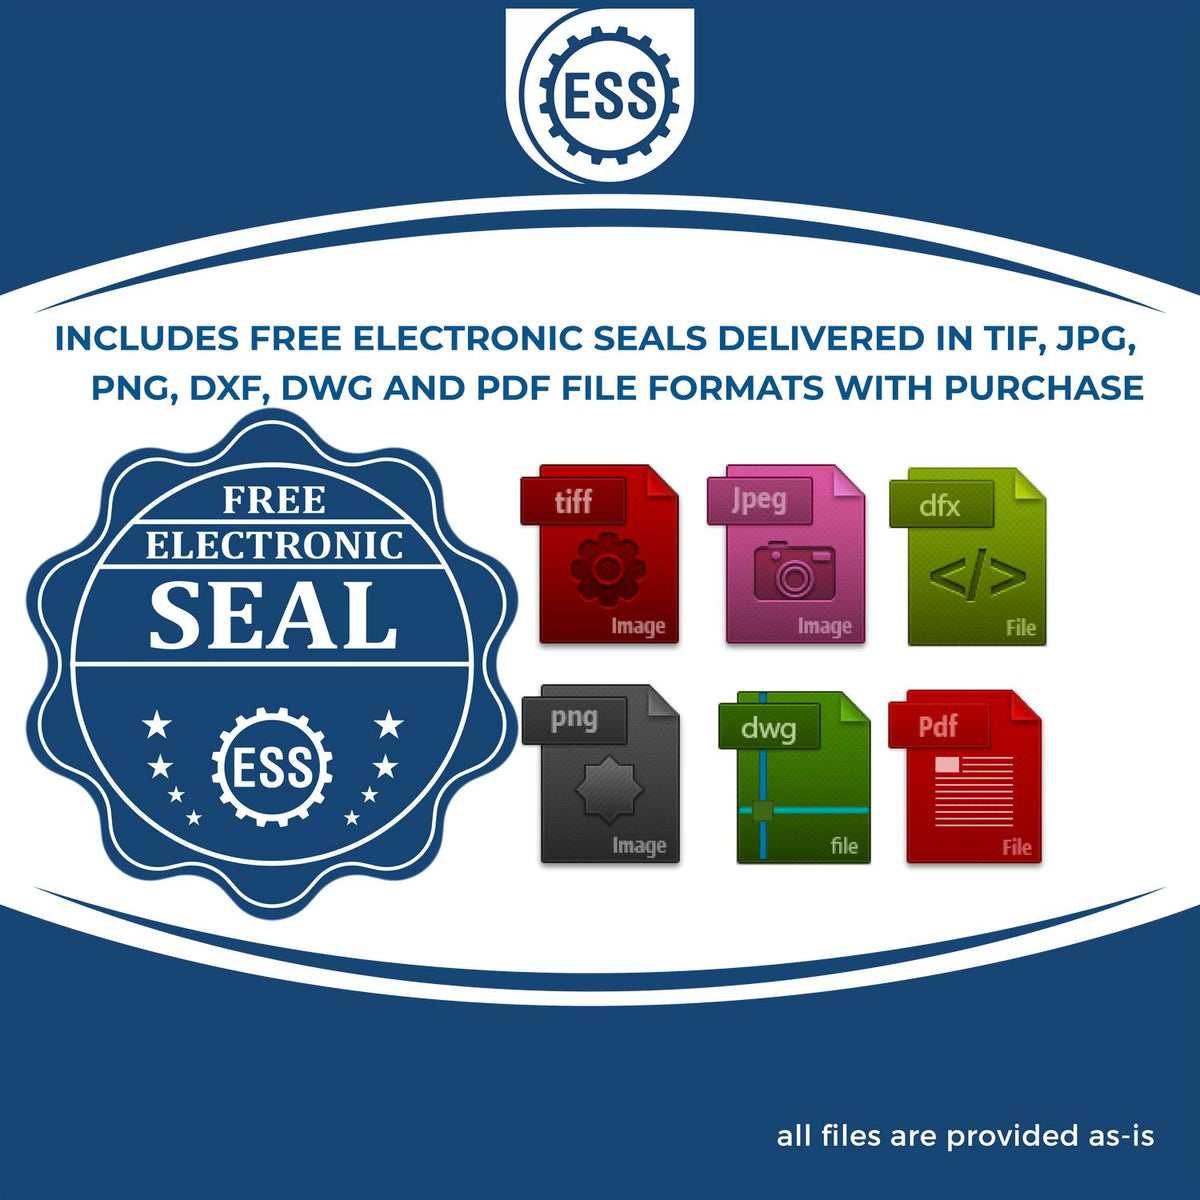 An infographic for the free electronic seal for the Premium MaxLight Pre-Inked Alaska Geology Stamp illustrating the different file type icons such as DXF, DWG, TIF, JPG and PNG.